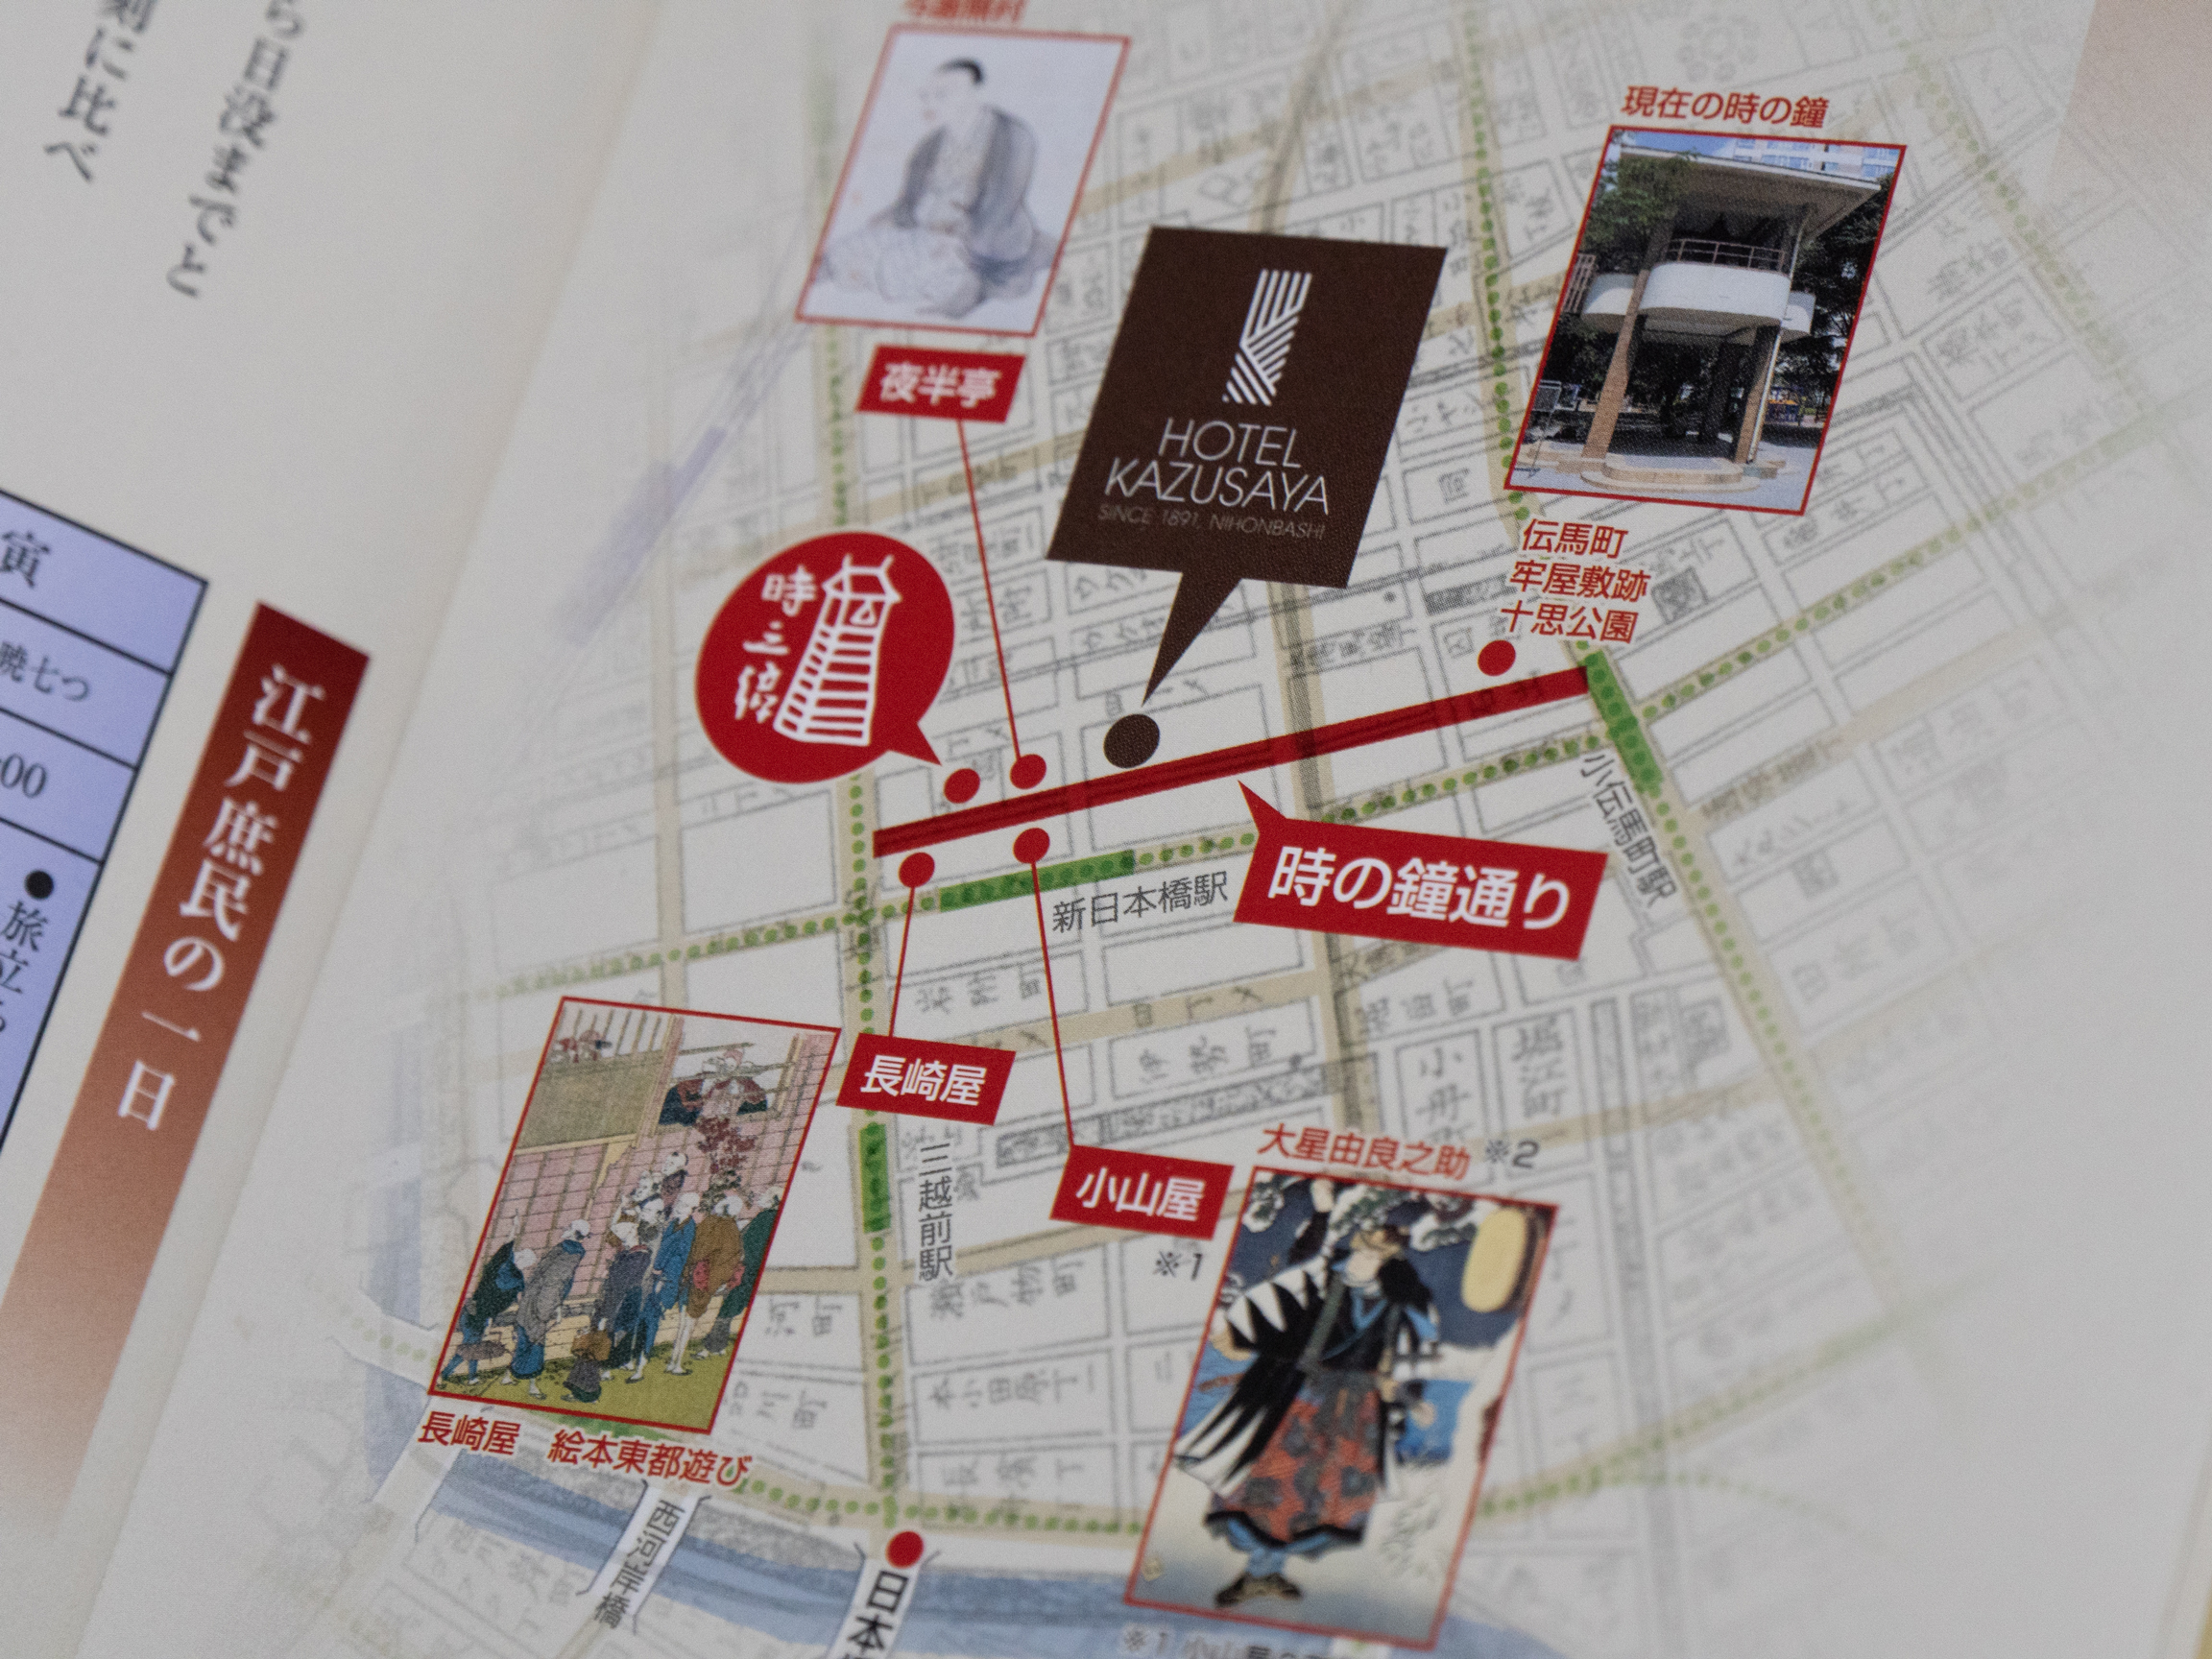 An Edo period the location of the hotel in relation to spots that famous historical figures frequented